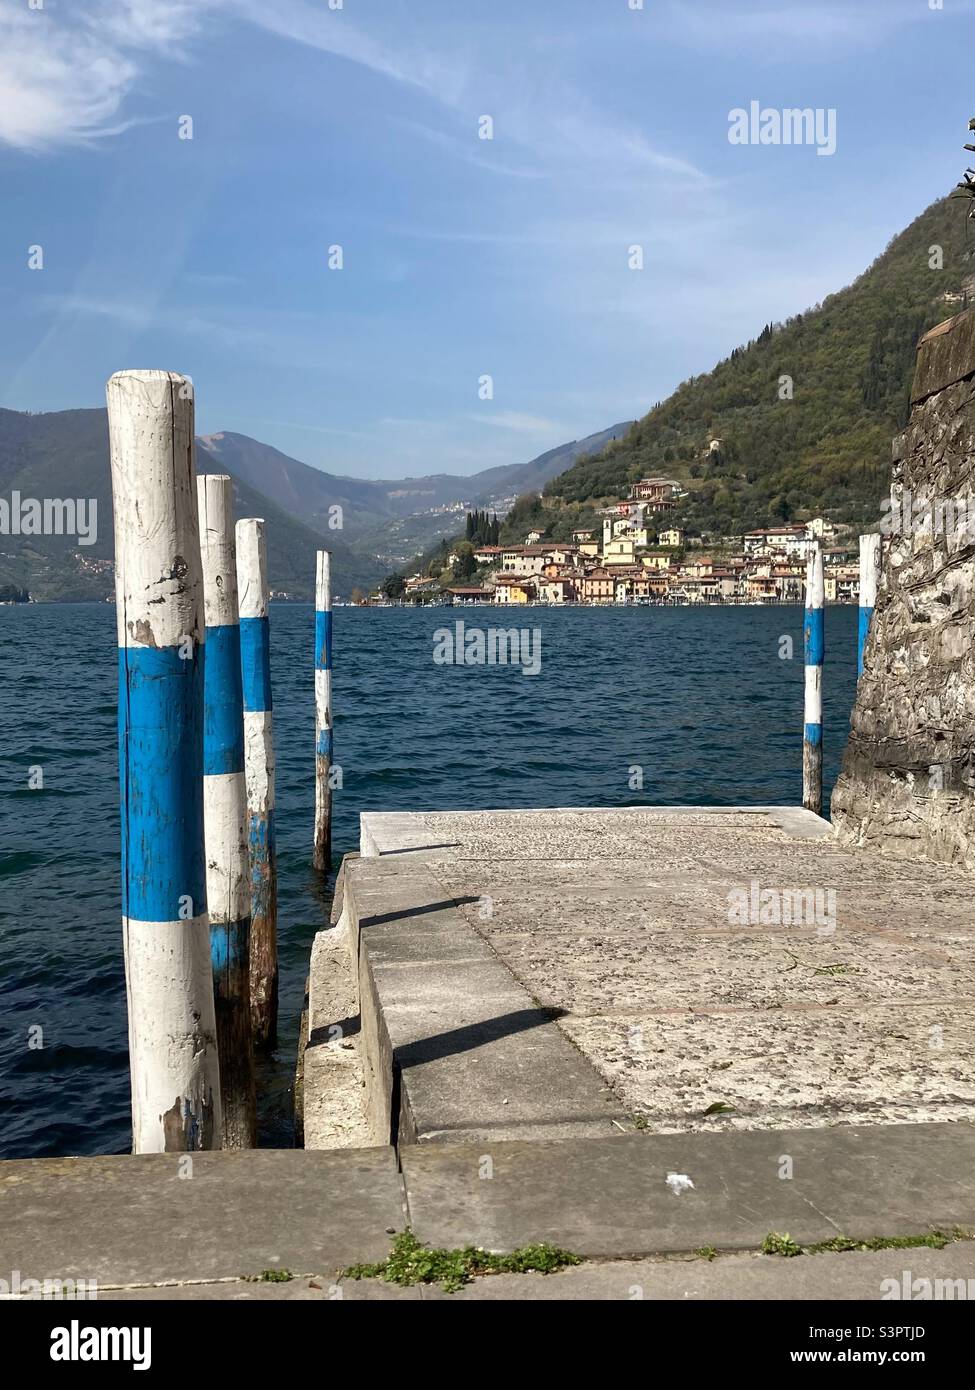 A Ferry dock in Sulzano at the Lago d‘Iseo with the Island Monte Isola in the background, Sulzano, Lombardy, Italy Stock Photo